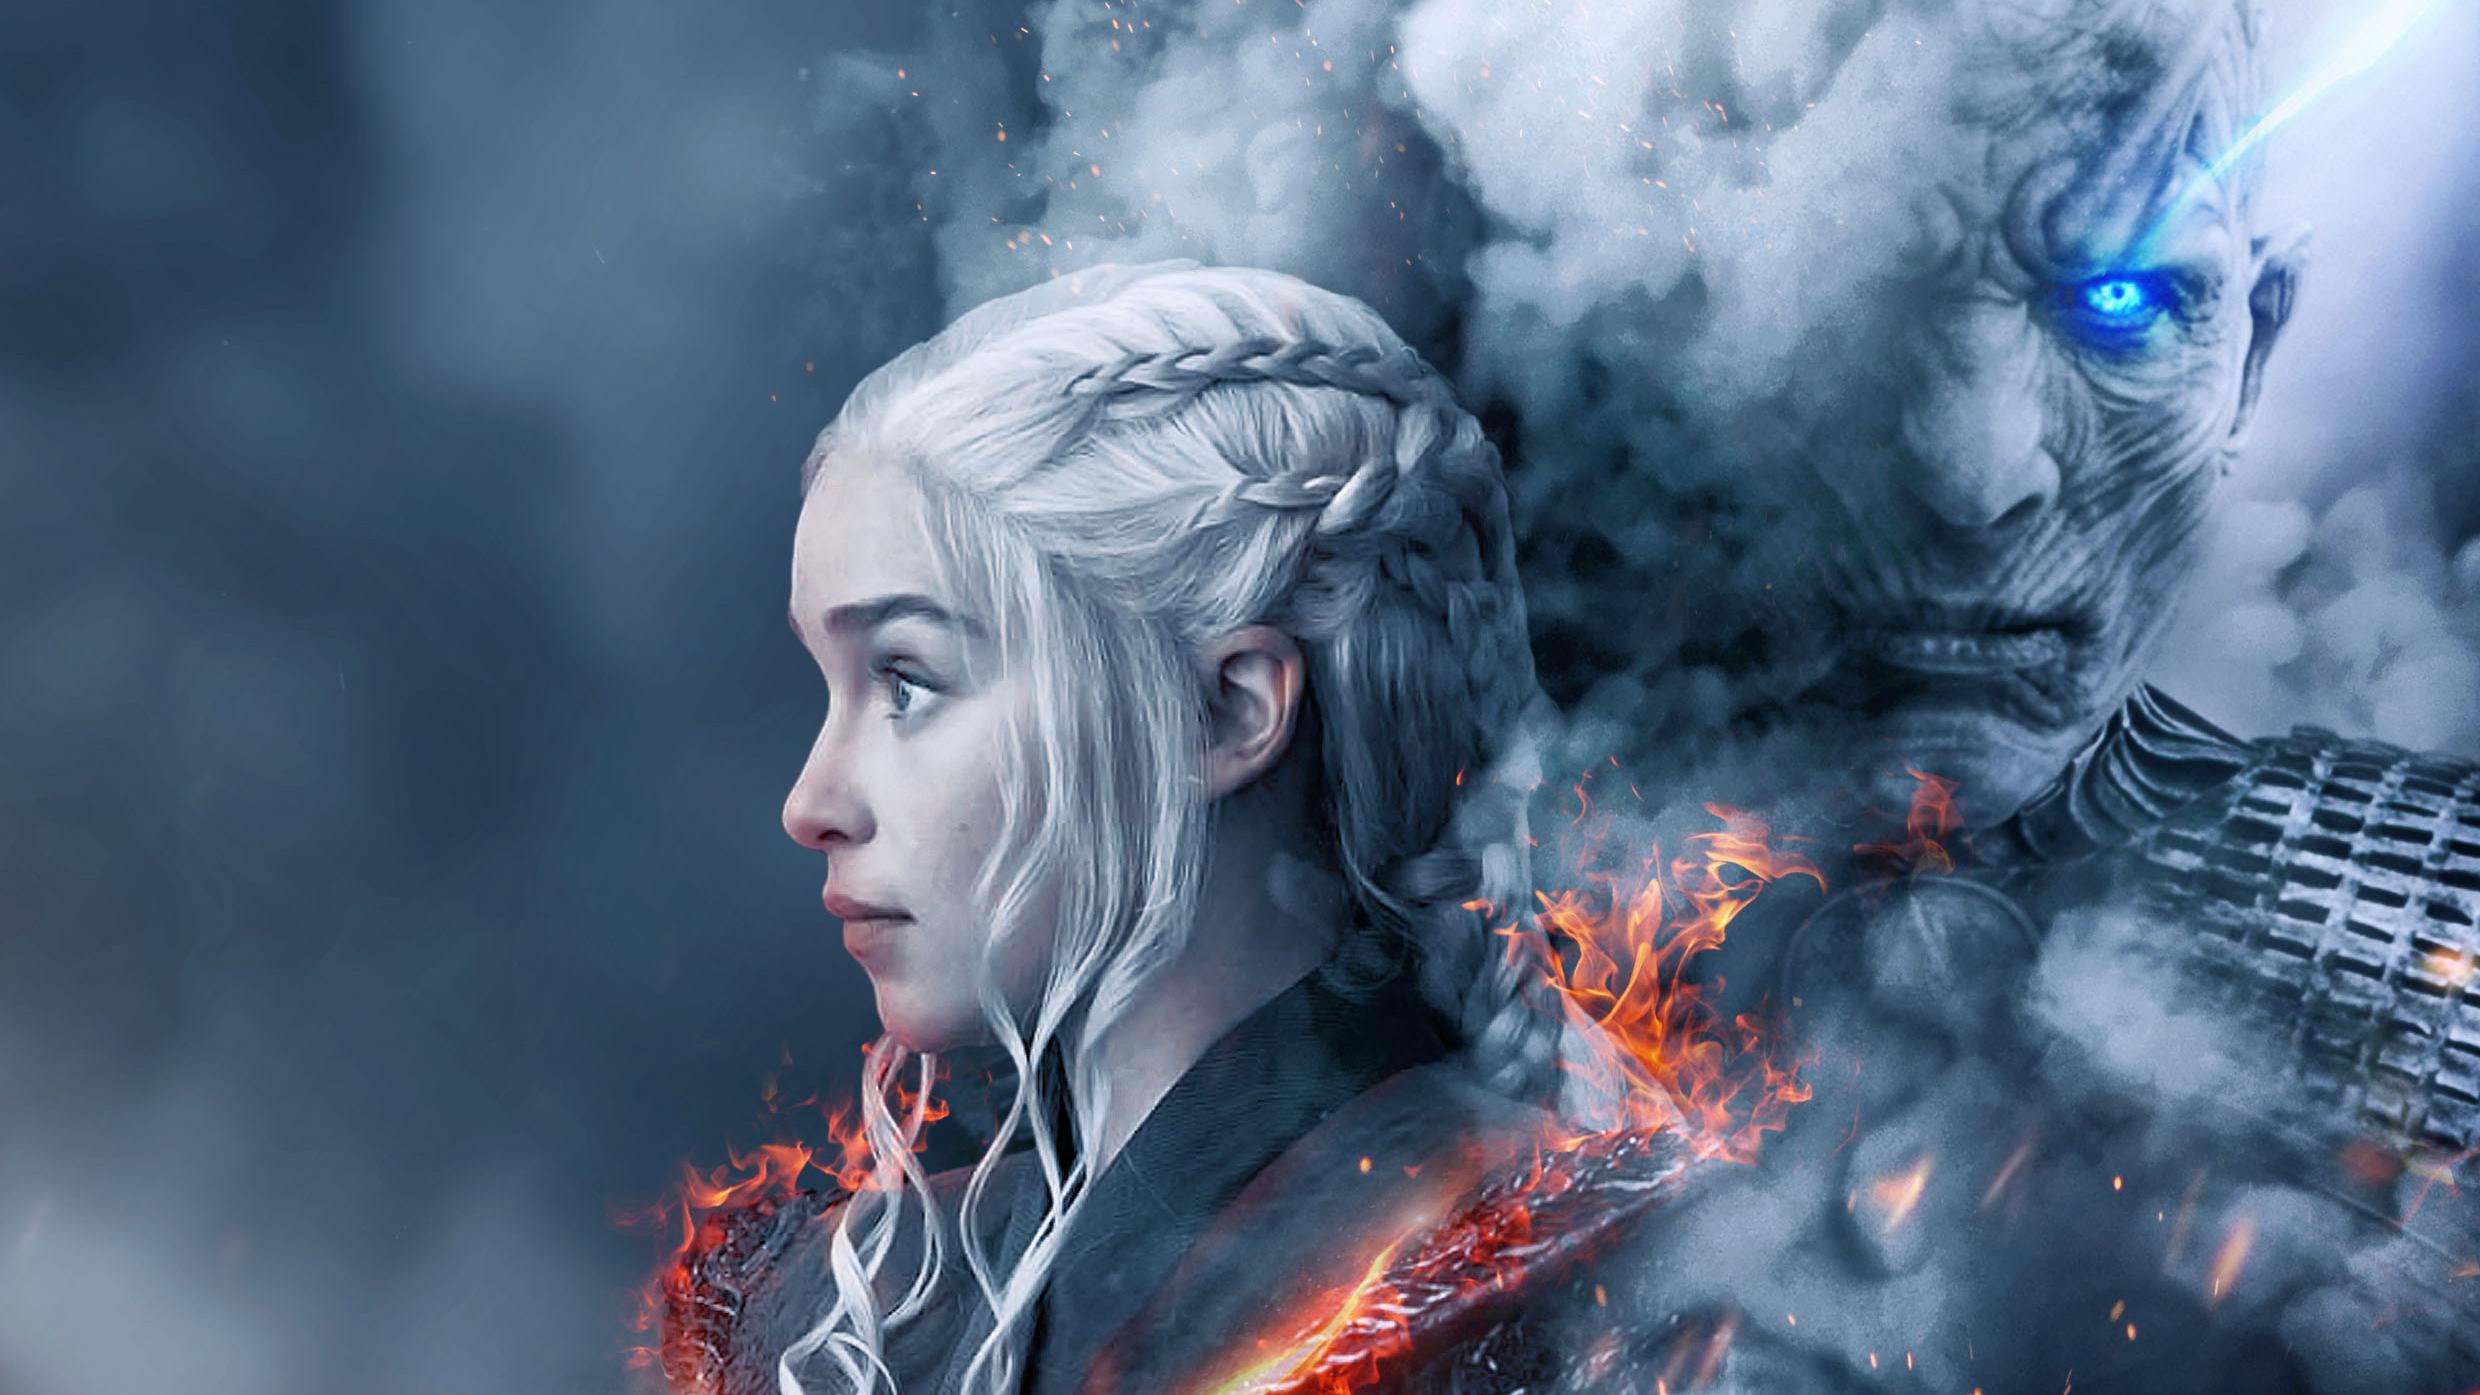 Game Of Thrones Season 8 Fan Poster, HD Tv Shows, 4k Wallpapers